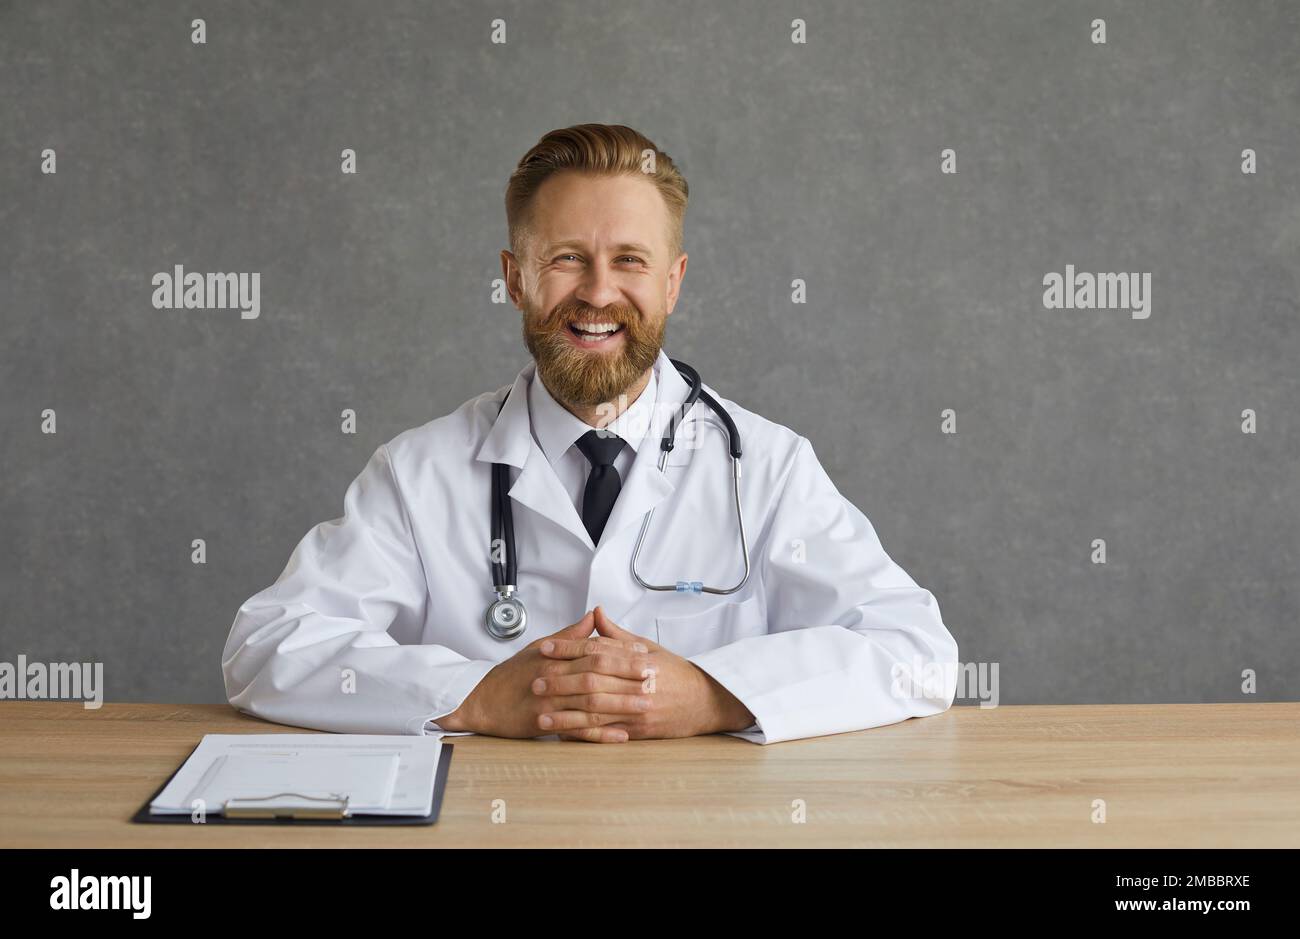 Adult caucasian male doctor wearing medical coat laughing sitting at desk Stock Photo